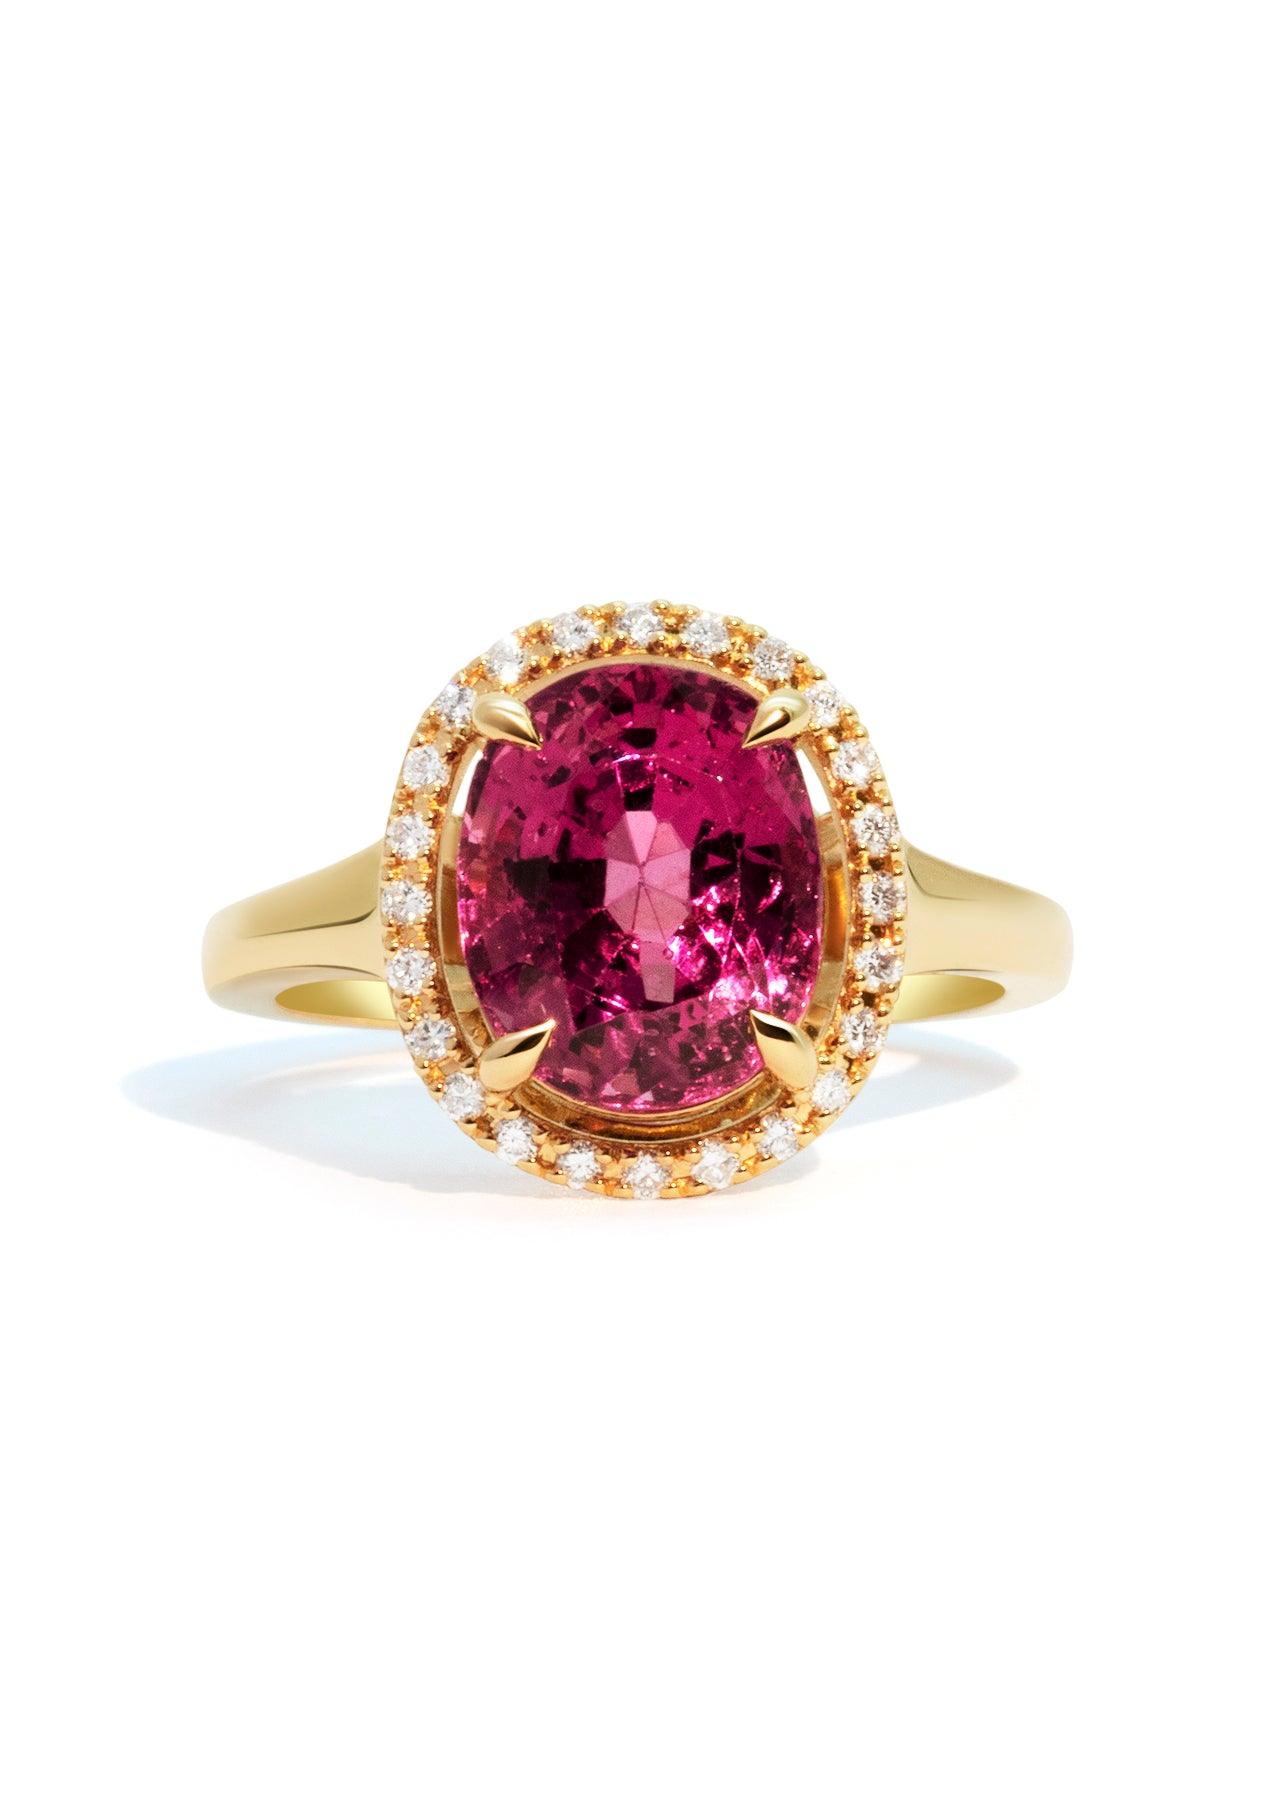 The Iris Ring with 4.4ct Oval Spinel - Molten Store